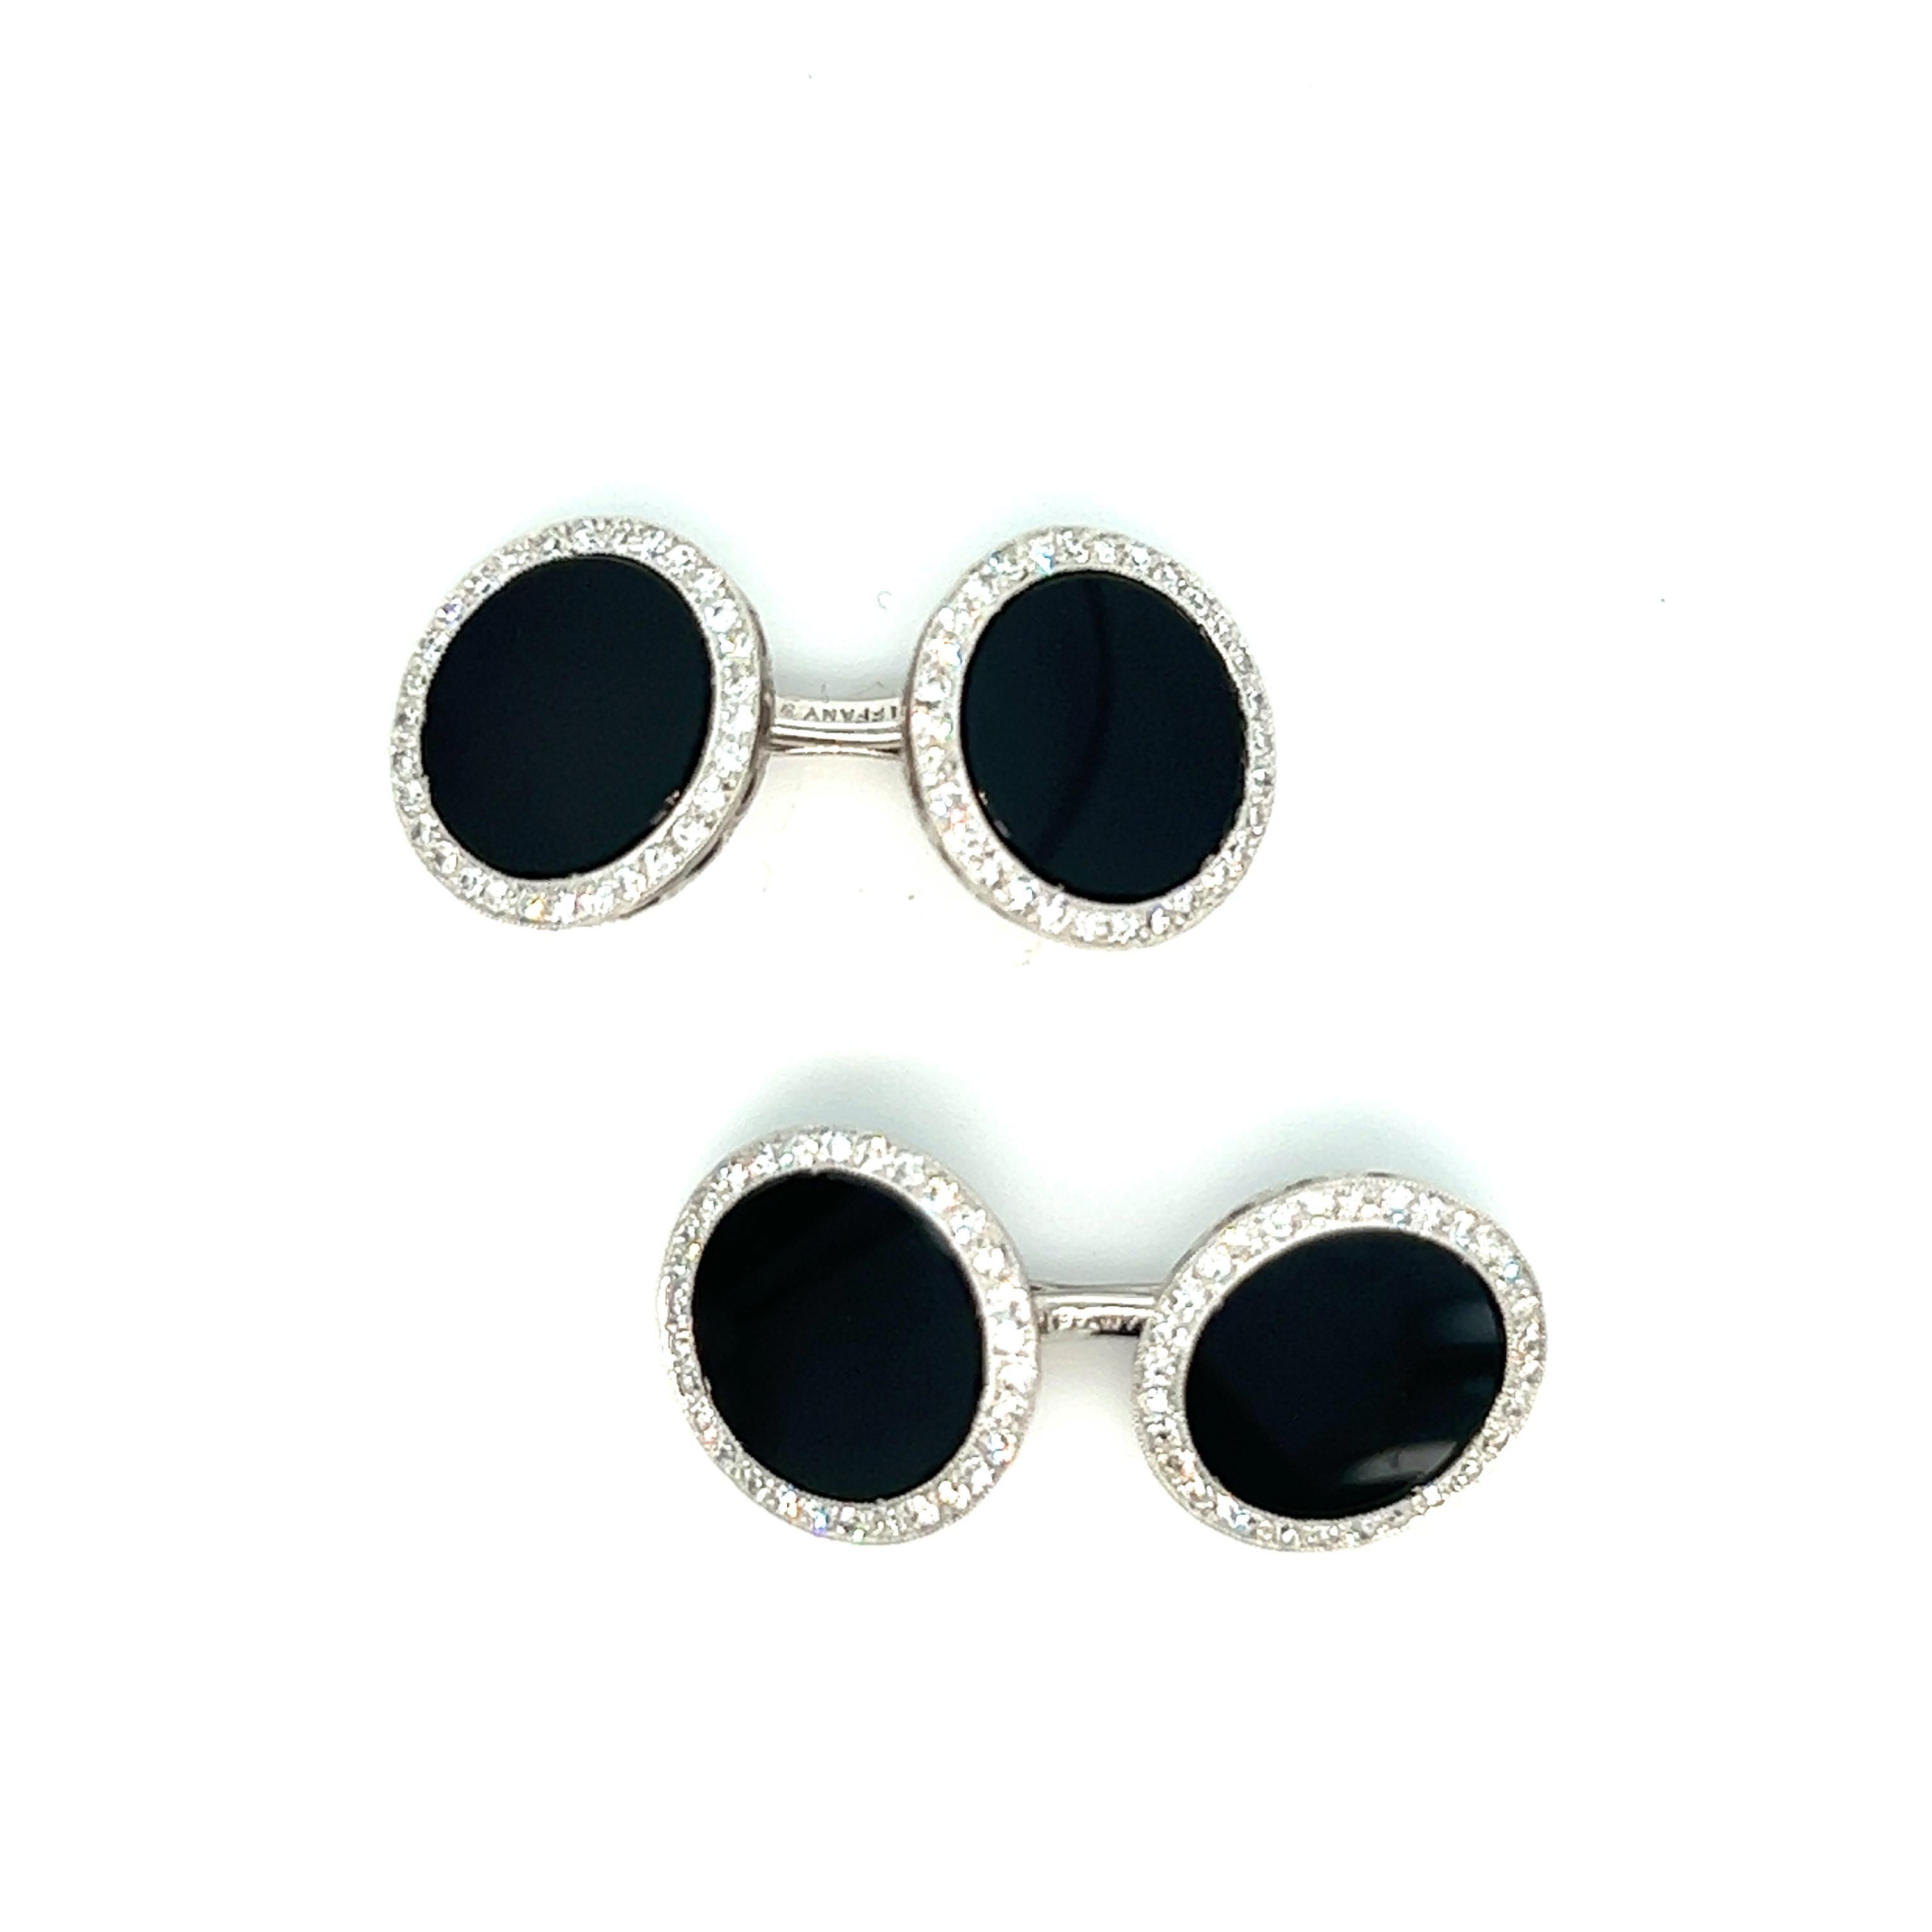 Tiffany & Co. black onyx diamond dress set

Extremely fine signed platinum and gold black onyx and diamond cufflinks, circa 1920s

Size: width 14 mm, length 14 mm
Total weight: 12.1 grams